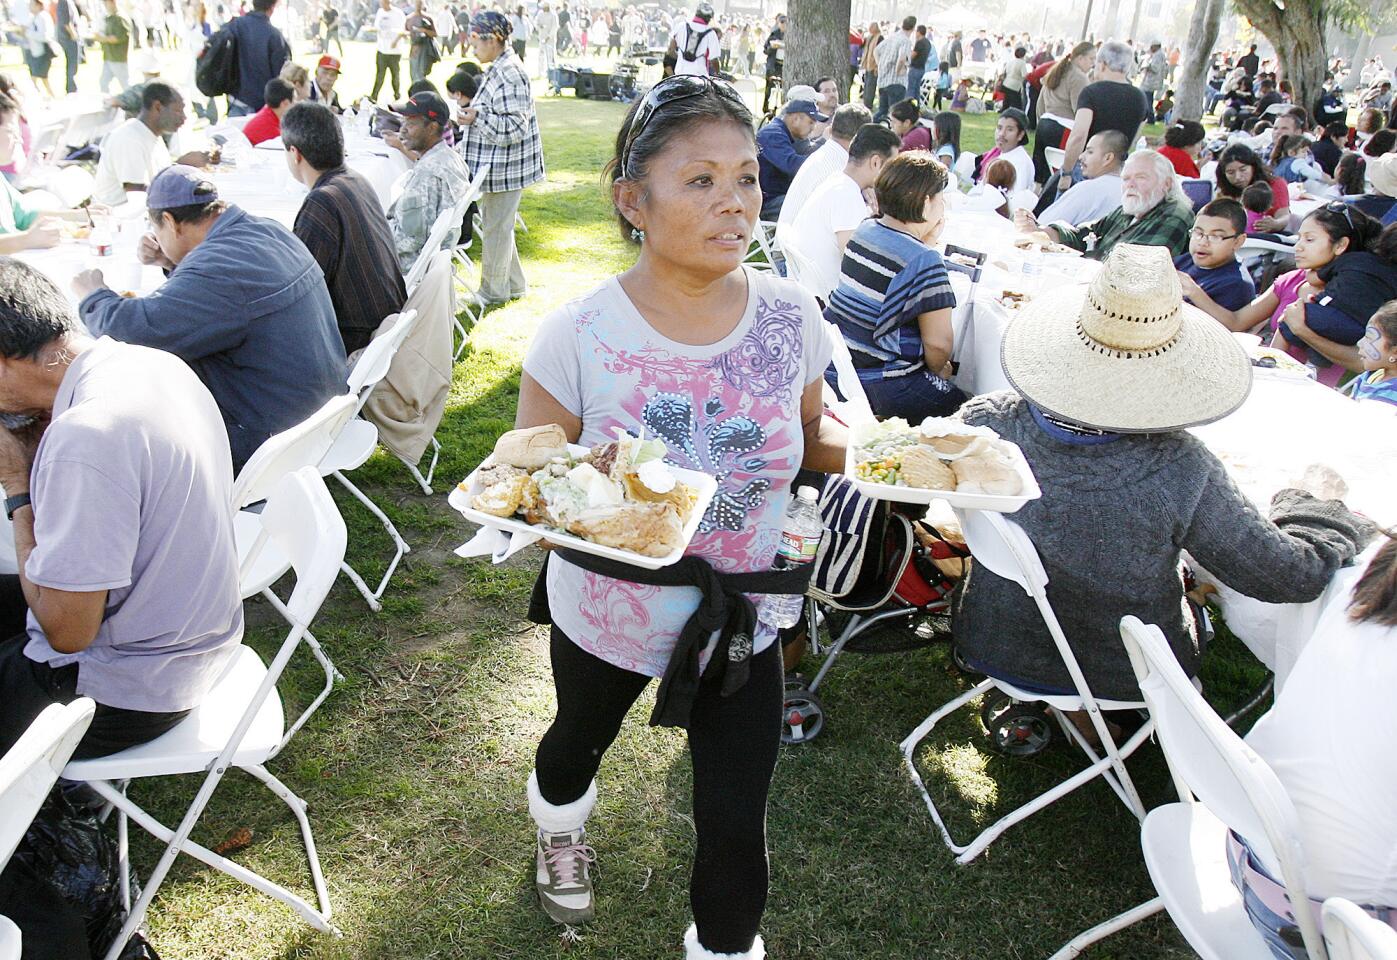 Monalyn Tarin, who is homeless in Pasadena, looks for her son carrying two plates of food through a crowded dining area at Central Park in Pasadena where Union Station Homeless Services served over 6,000 meals for the 35th Thanksgiving Dinner-in-the-Park on Thanksgiving on Thursday, November 22, 2012.